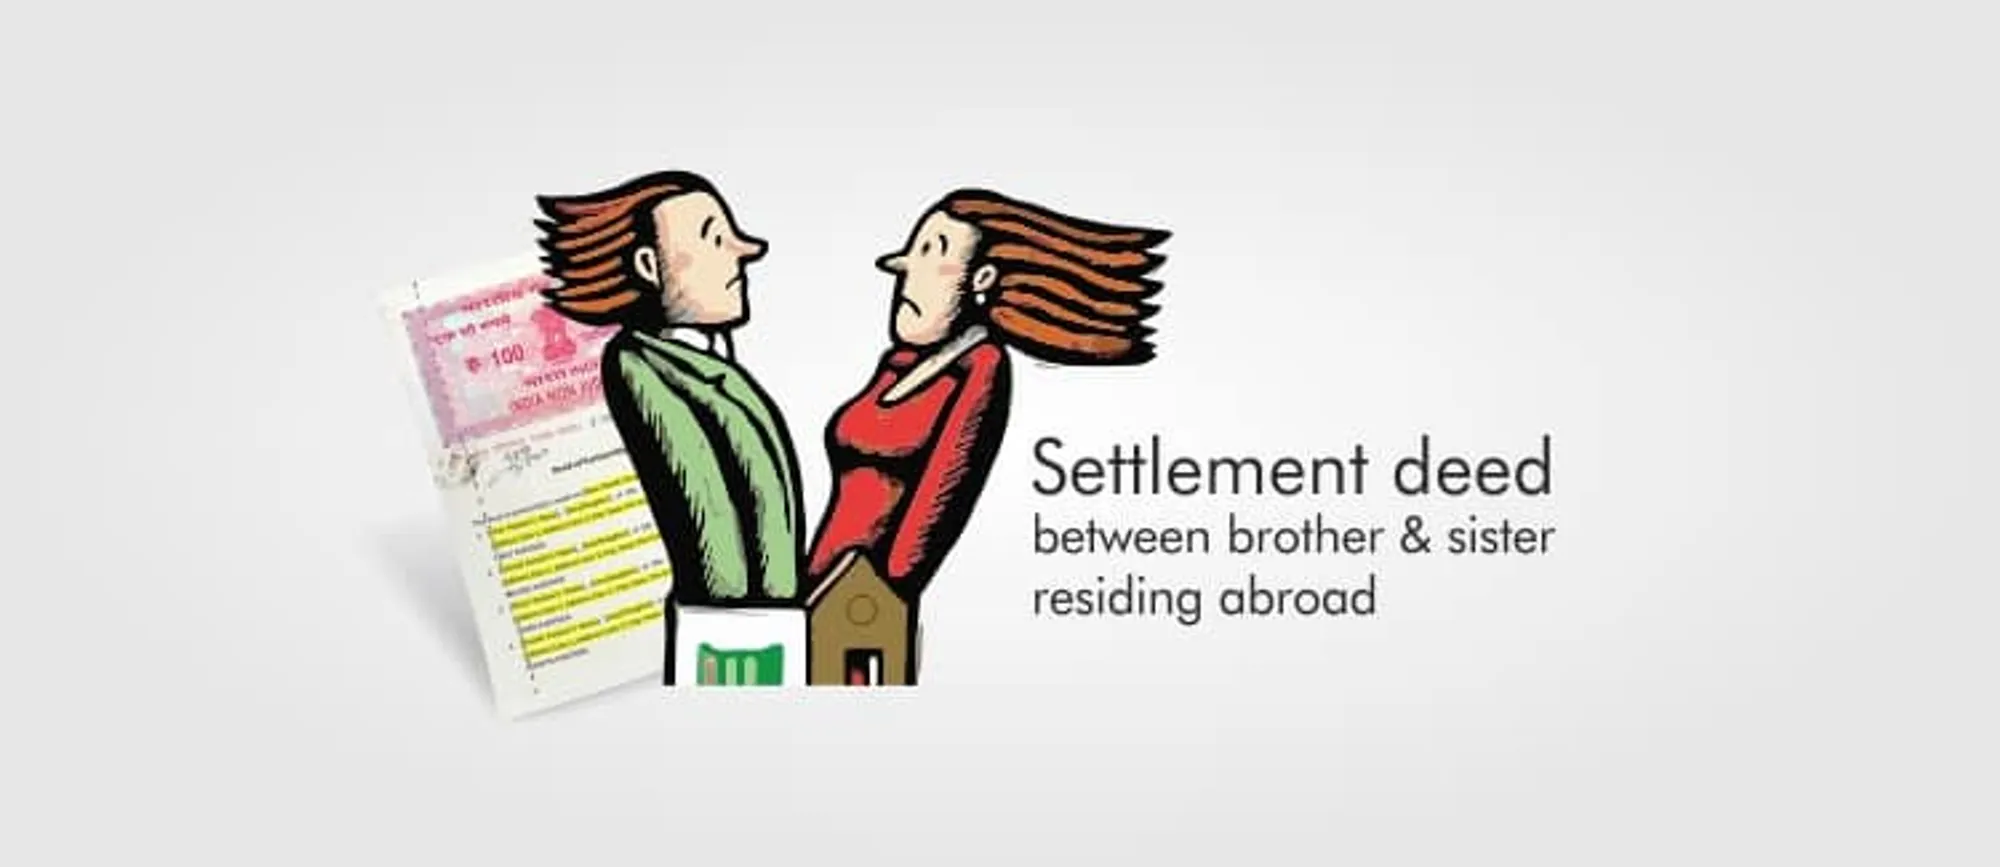 Settlement deed between brother and sister residing abroad